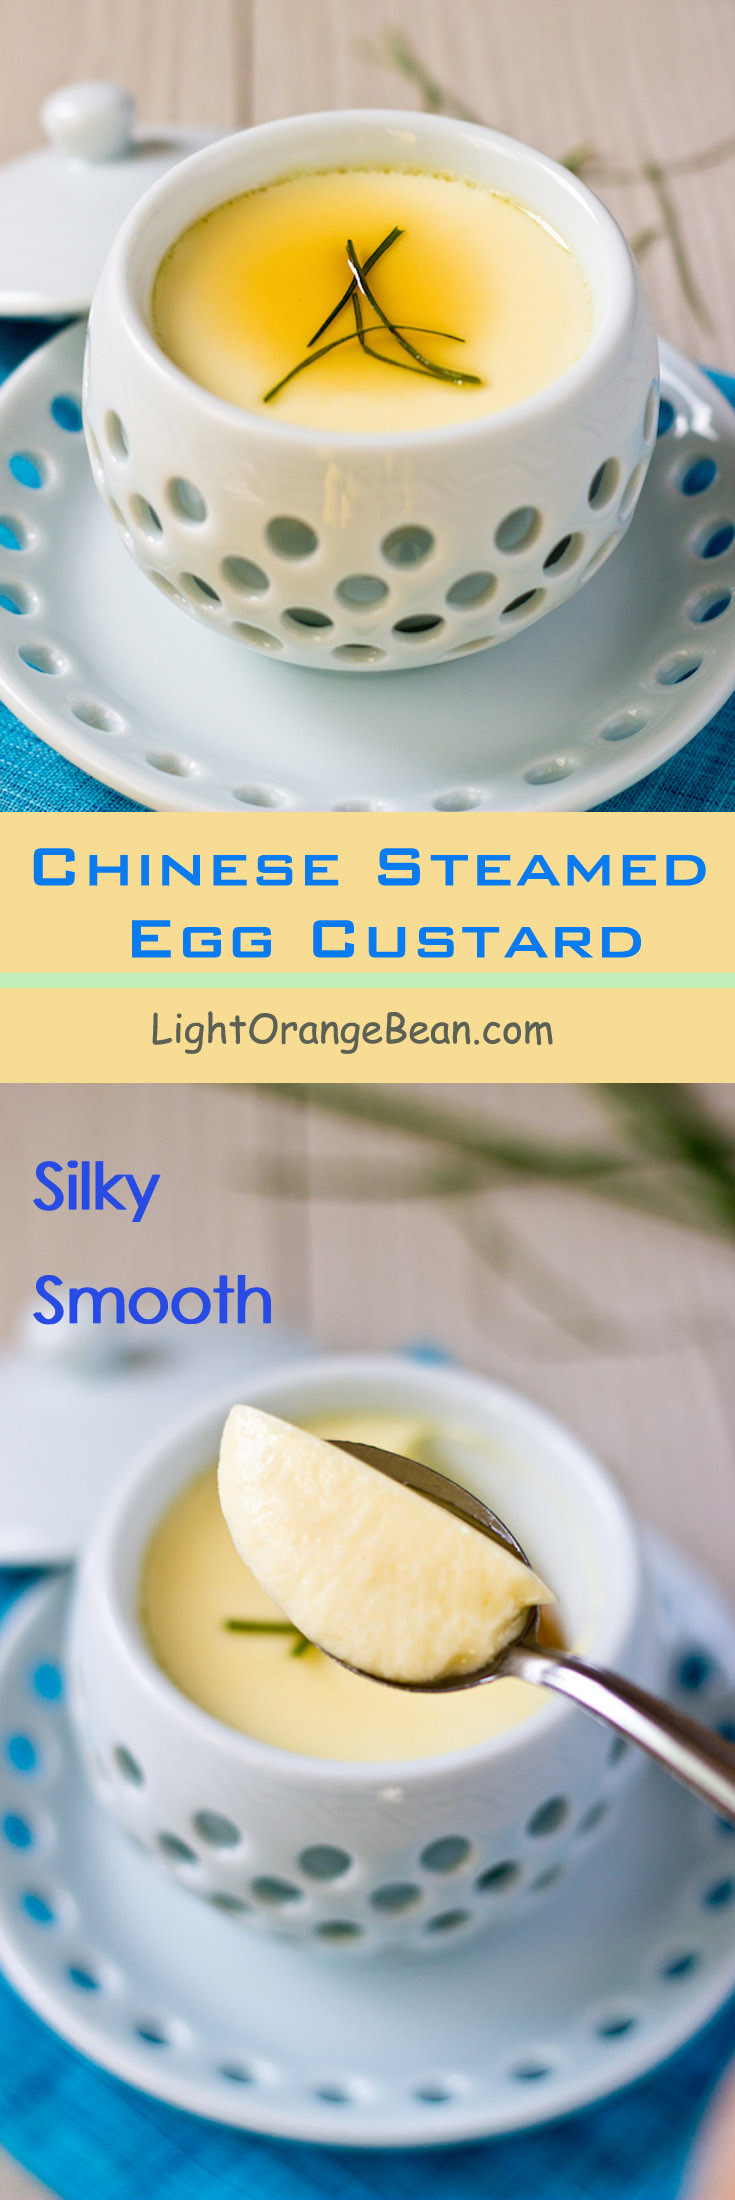 Chinese Steamed Egg Recipes
 Chinese Steamed Egg Custard